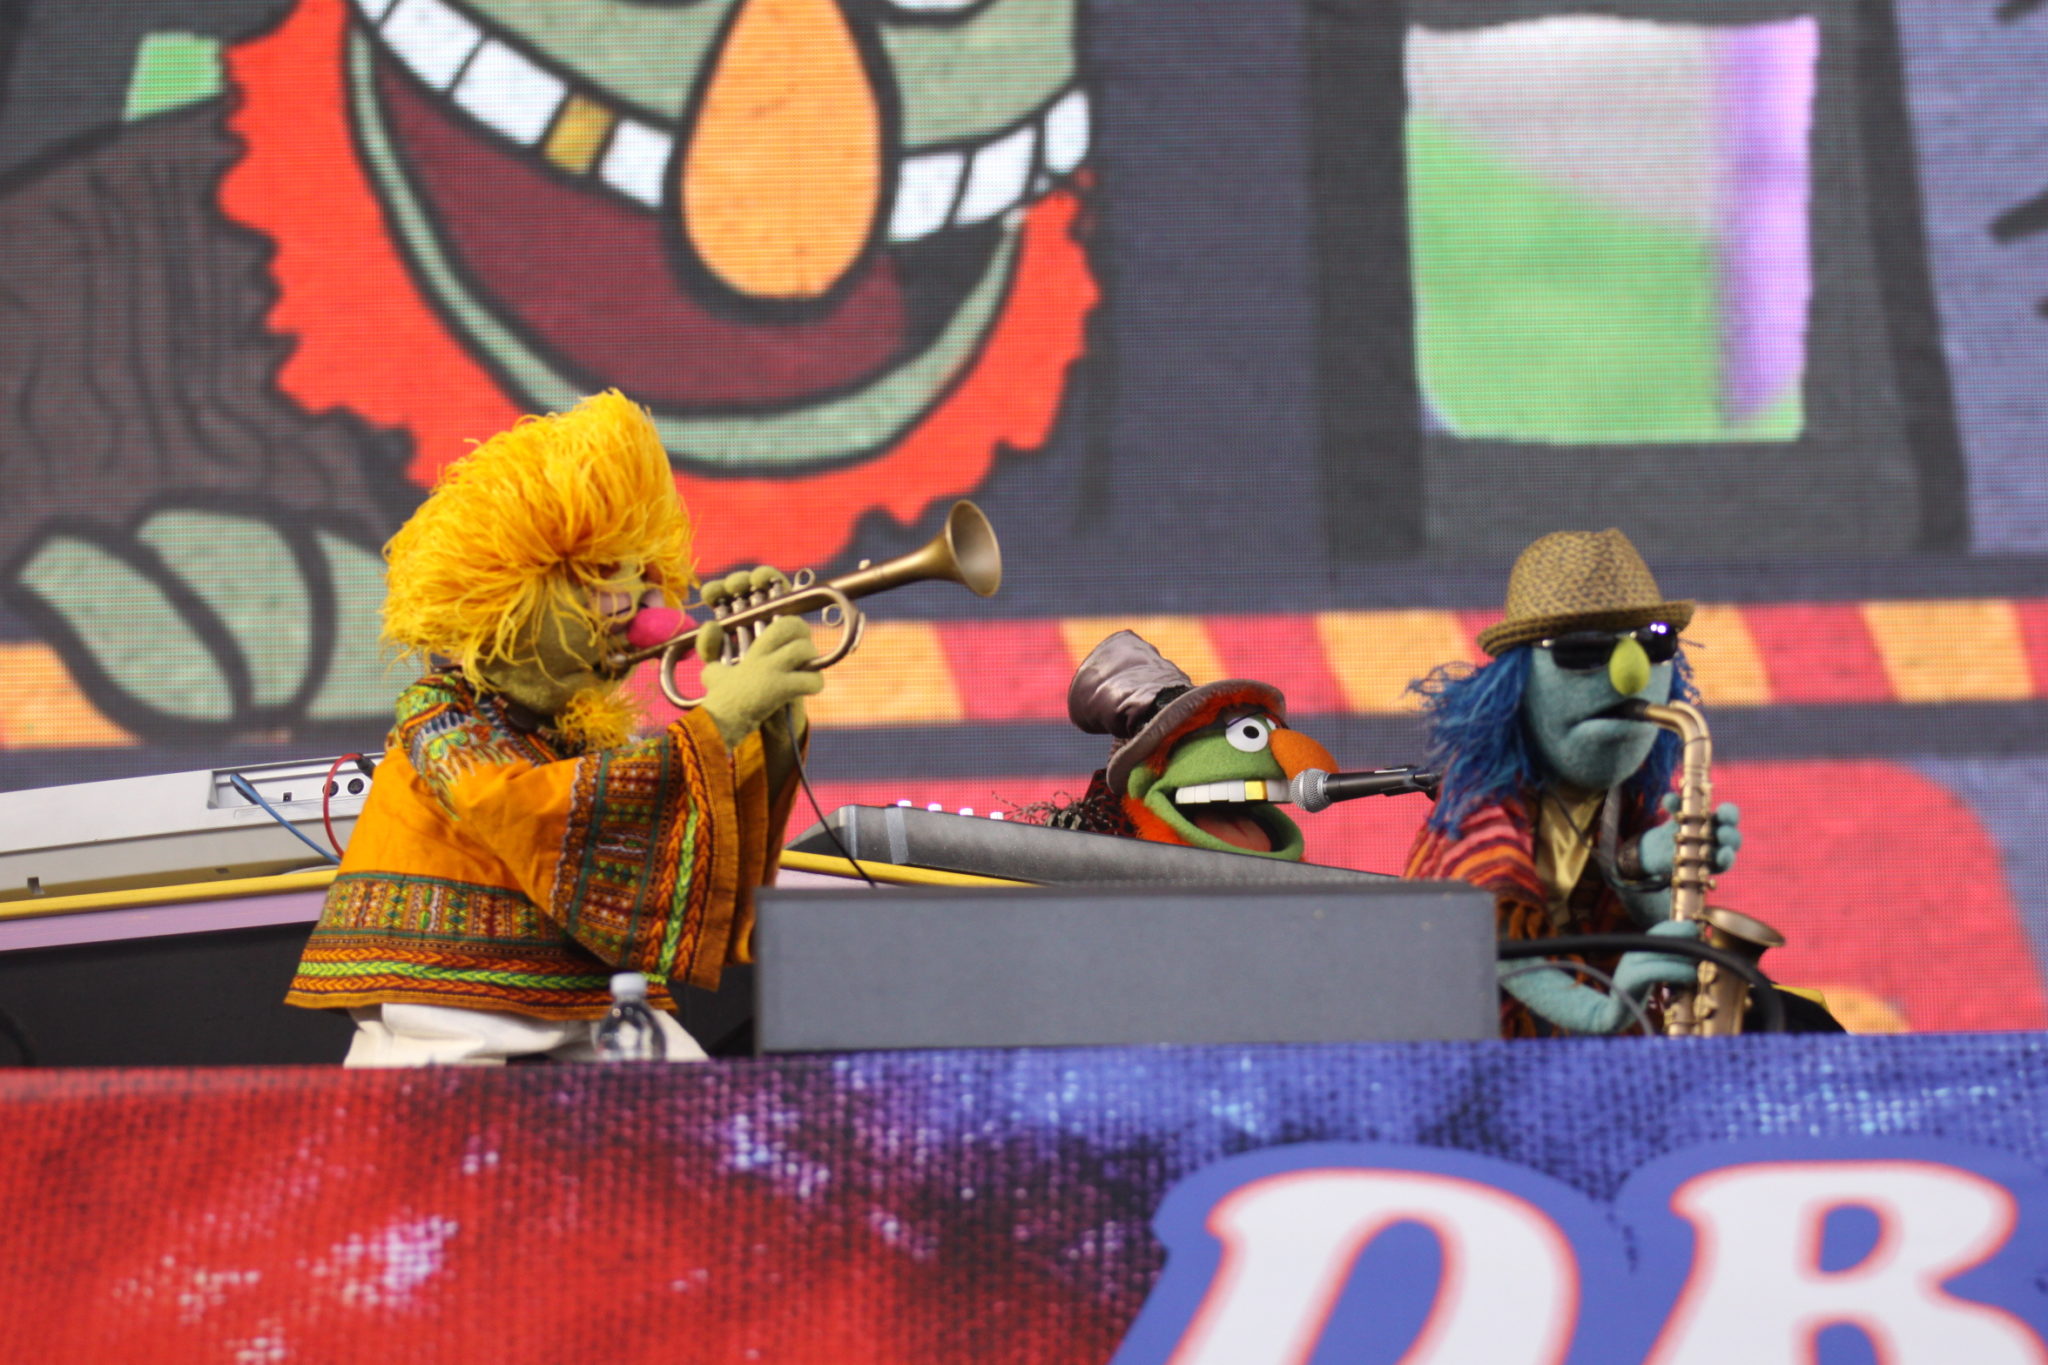 The Muppets live onstage at the 2016 Outside Lands Music Festival in Golden Gate Park